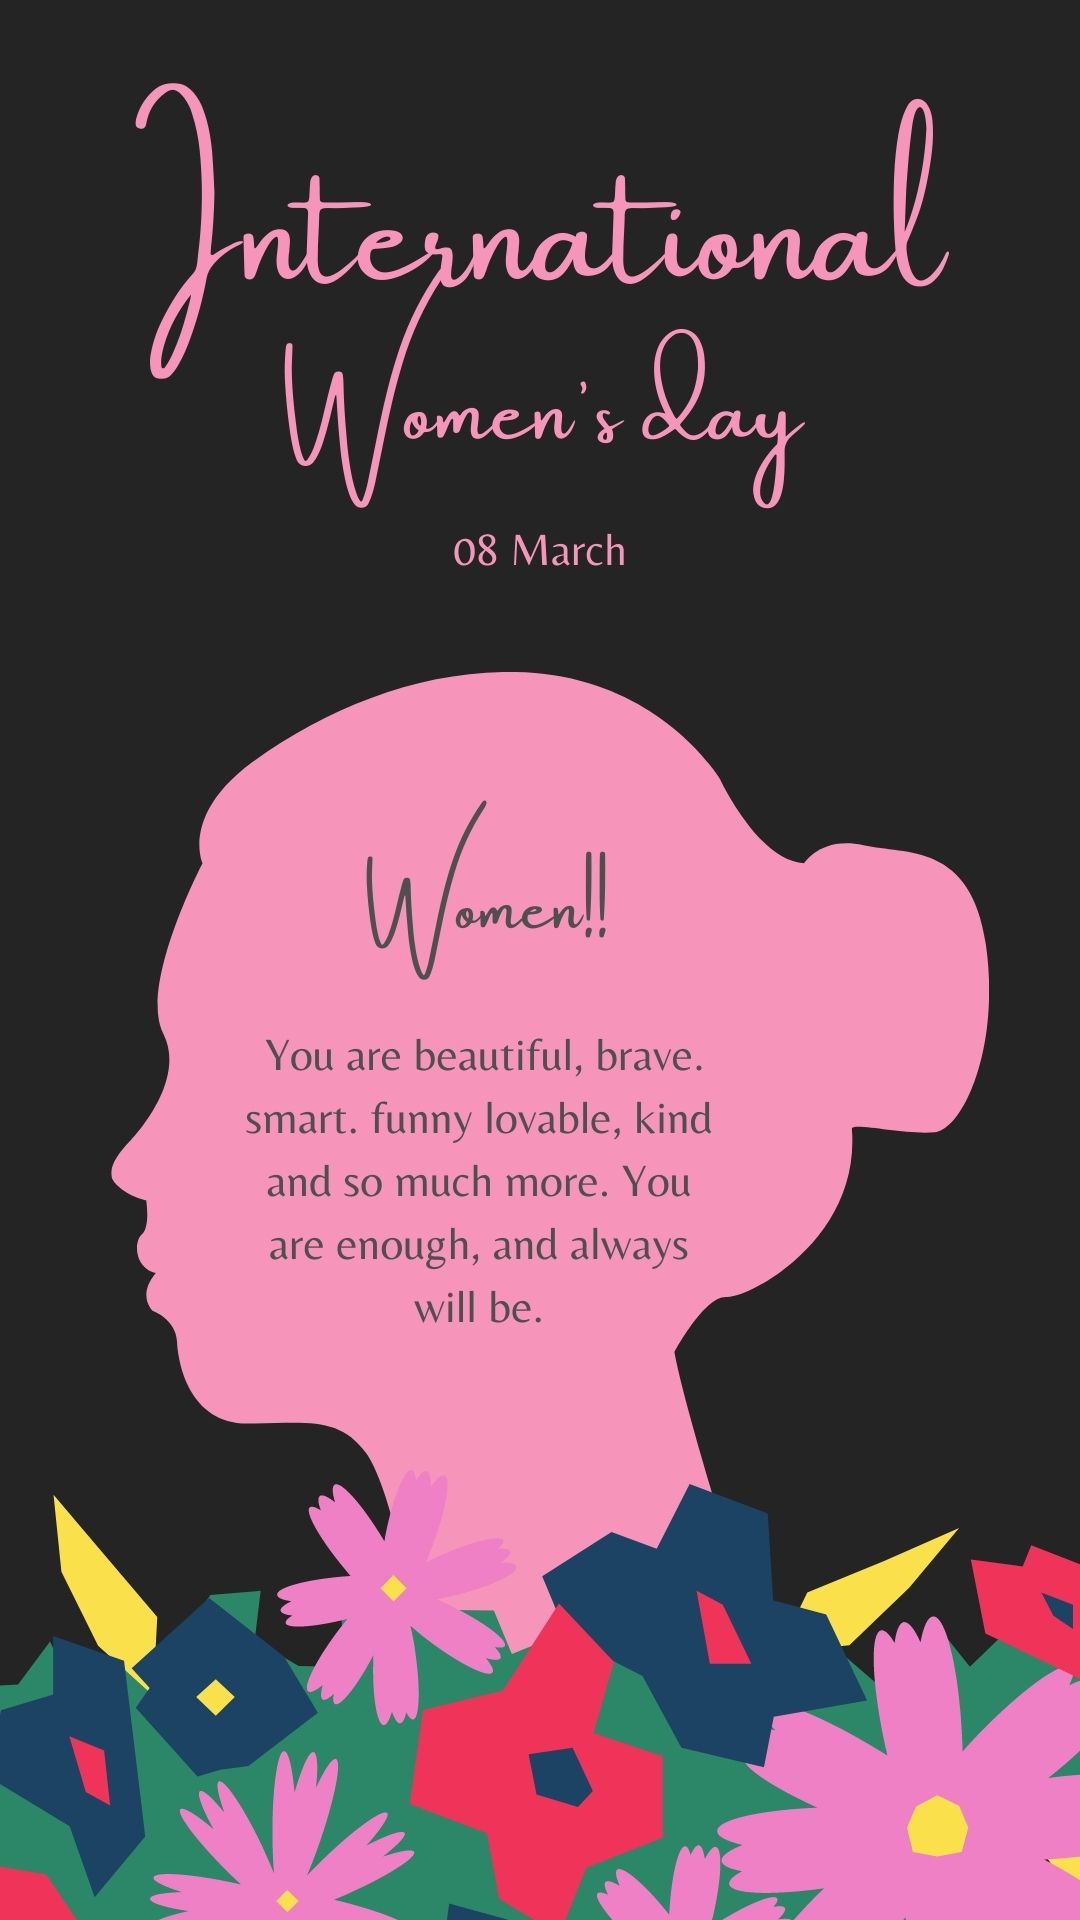 Happy Women's Day 2023: Wishes, Image, Status, Quotes, Messages and WhatsApp Greetings to Share